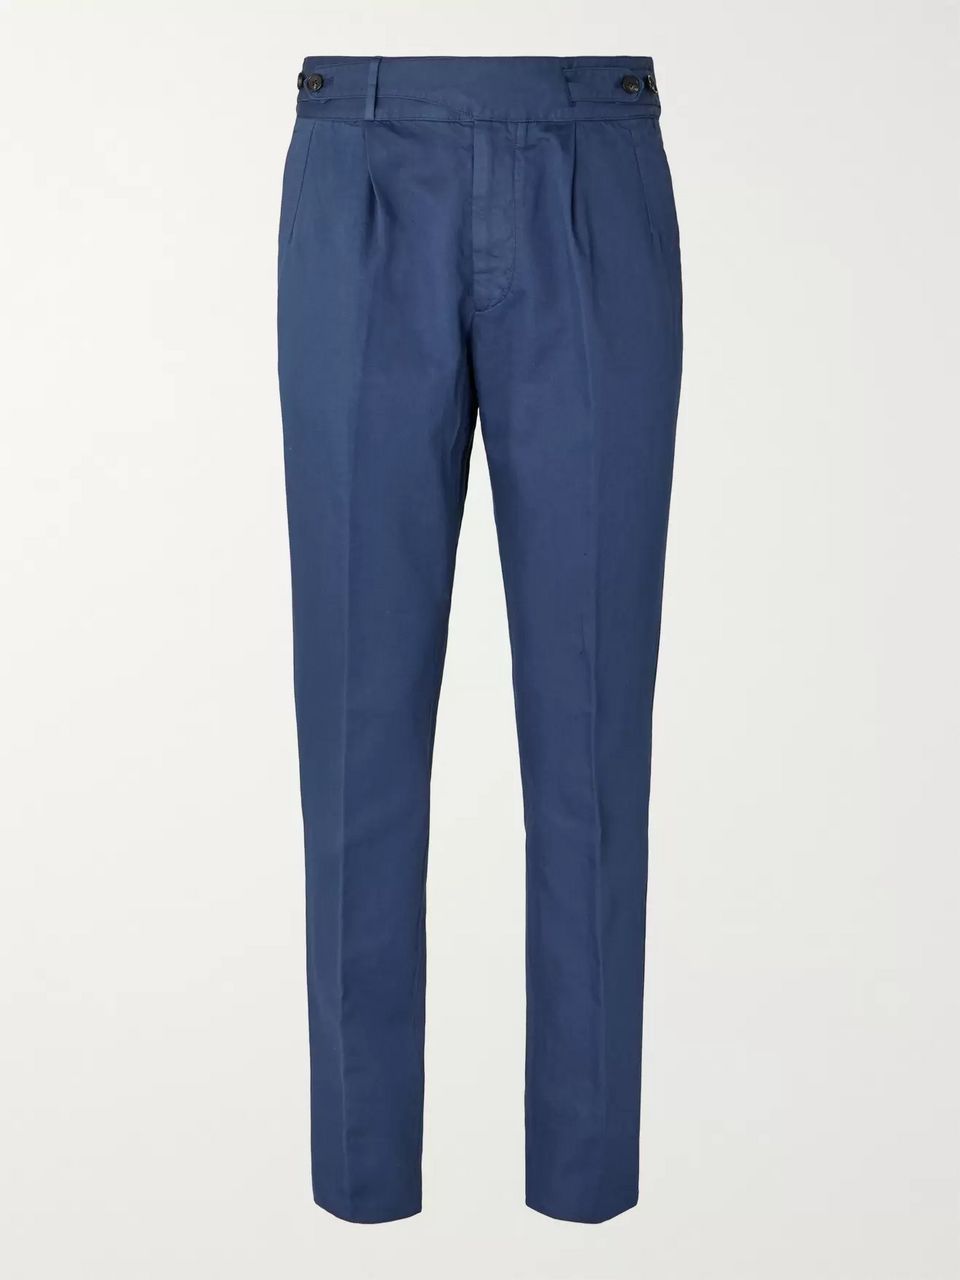 Navy Navy Pleated Garment-Dyed Cotton and Linen-Blend Twill Trousers ...